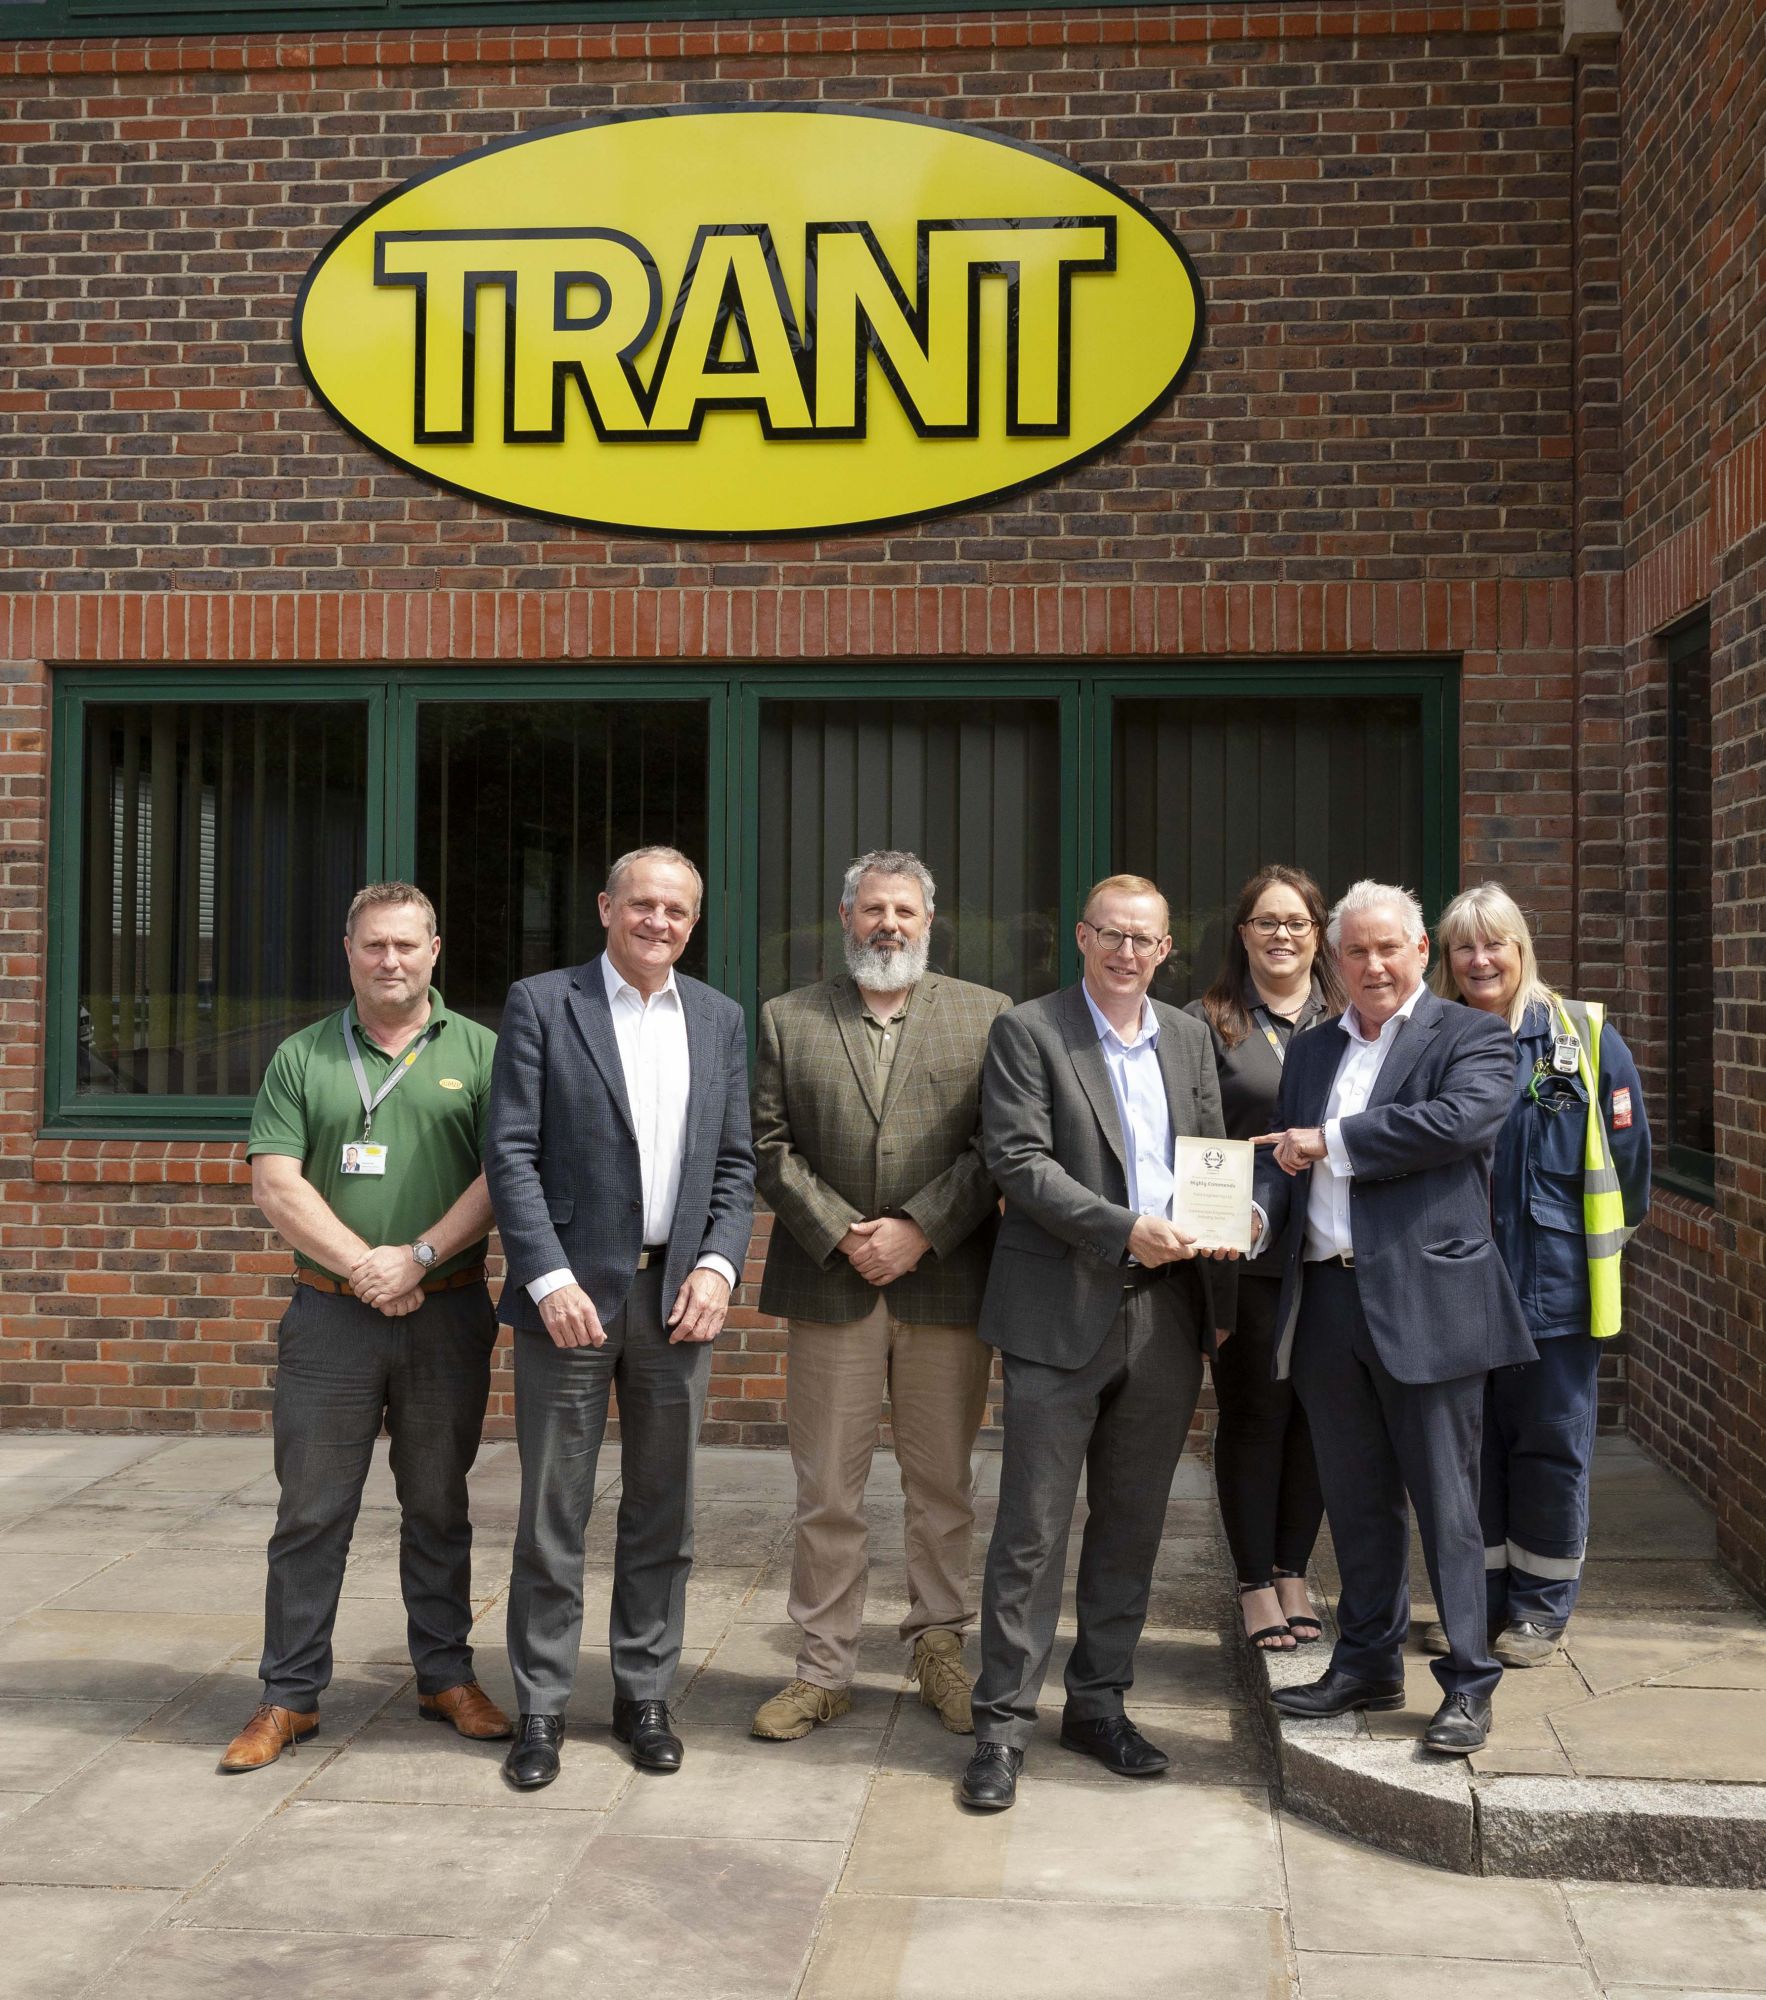 SAFETY FIRST: Trant Engineering has officially been recognised by The Royal Society for the Prevention of Accidents (RoSPA) as an industry leader in health and safety practice for the 35th consecutive year. The Southampton-based company, established in 1958, has 1,000 employees and works in high-risk infrastructure environments in the UK and overseas. Clients include ExxonMobil, Southern Water, the Ministry of Defence, Portsmouth Water, National Grid, Wessex Water and Magnox. From left, with RoSPA’s accolade, Trant Engineering’s Tim Bullen, Gerry Somers (Managing Director), Andy Lilof, Alistair Parker, Leanne Wink, Brian Ormiston and Susan Froggett.